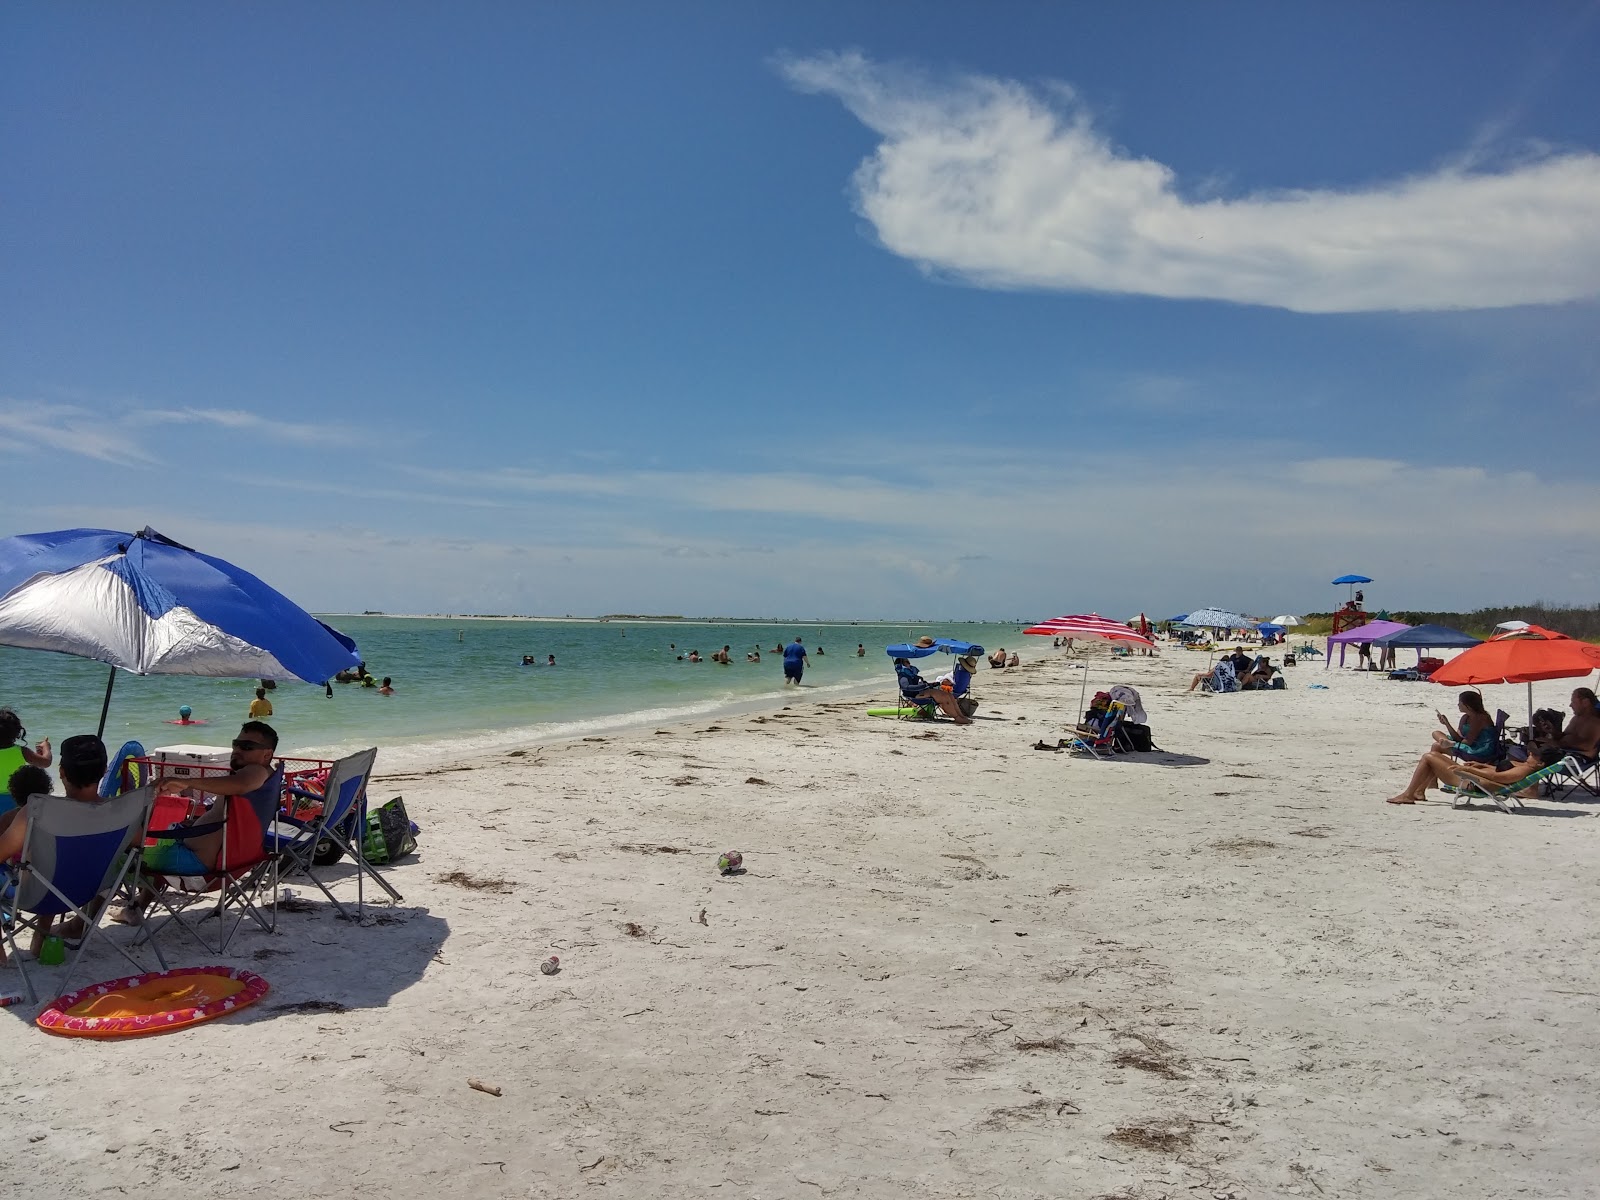 Photo of Fort desoto beach - popular place among relax connoisseurs